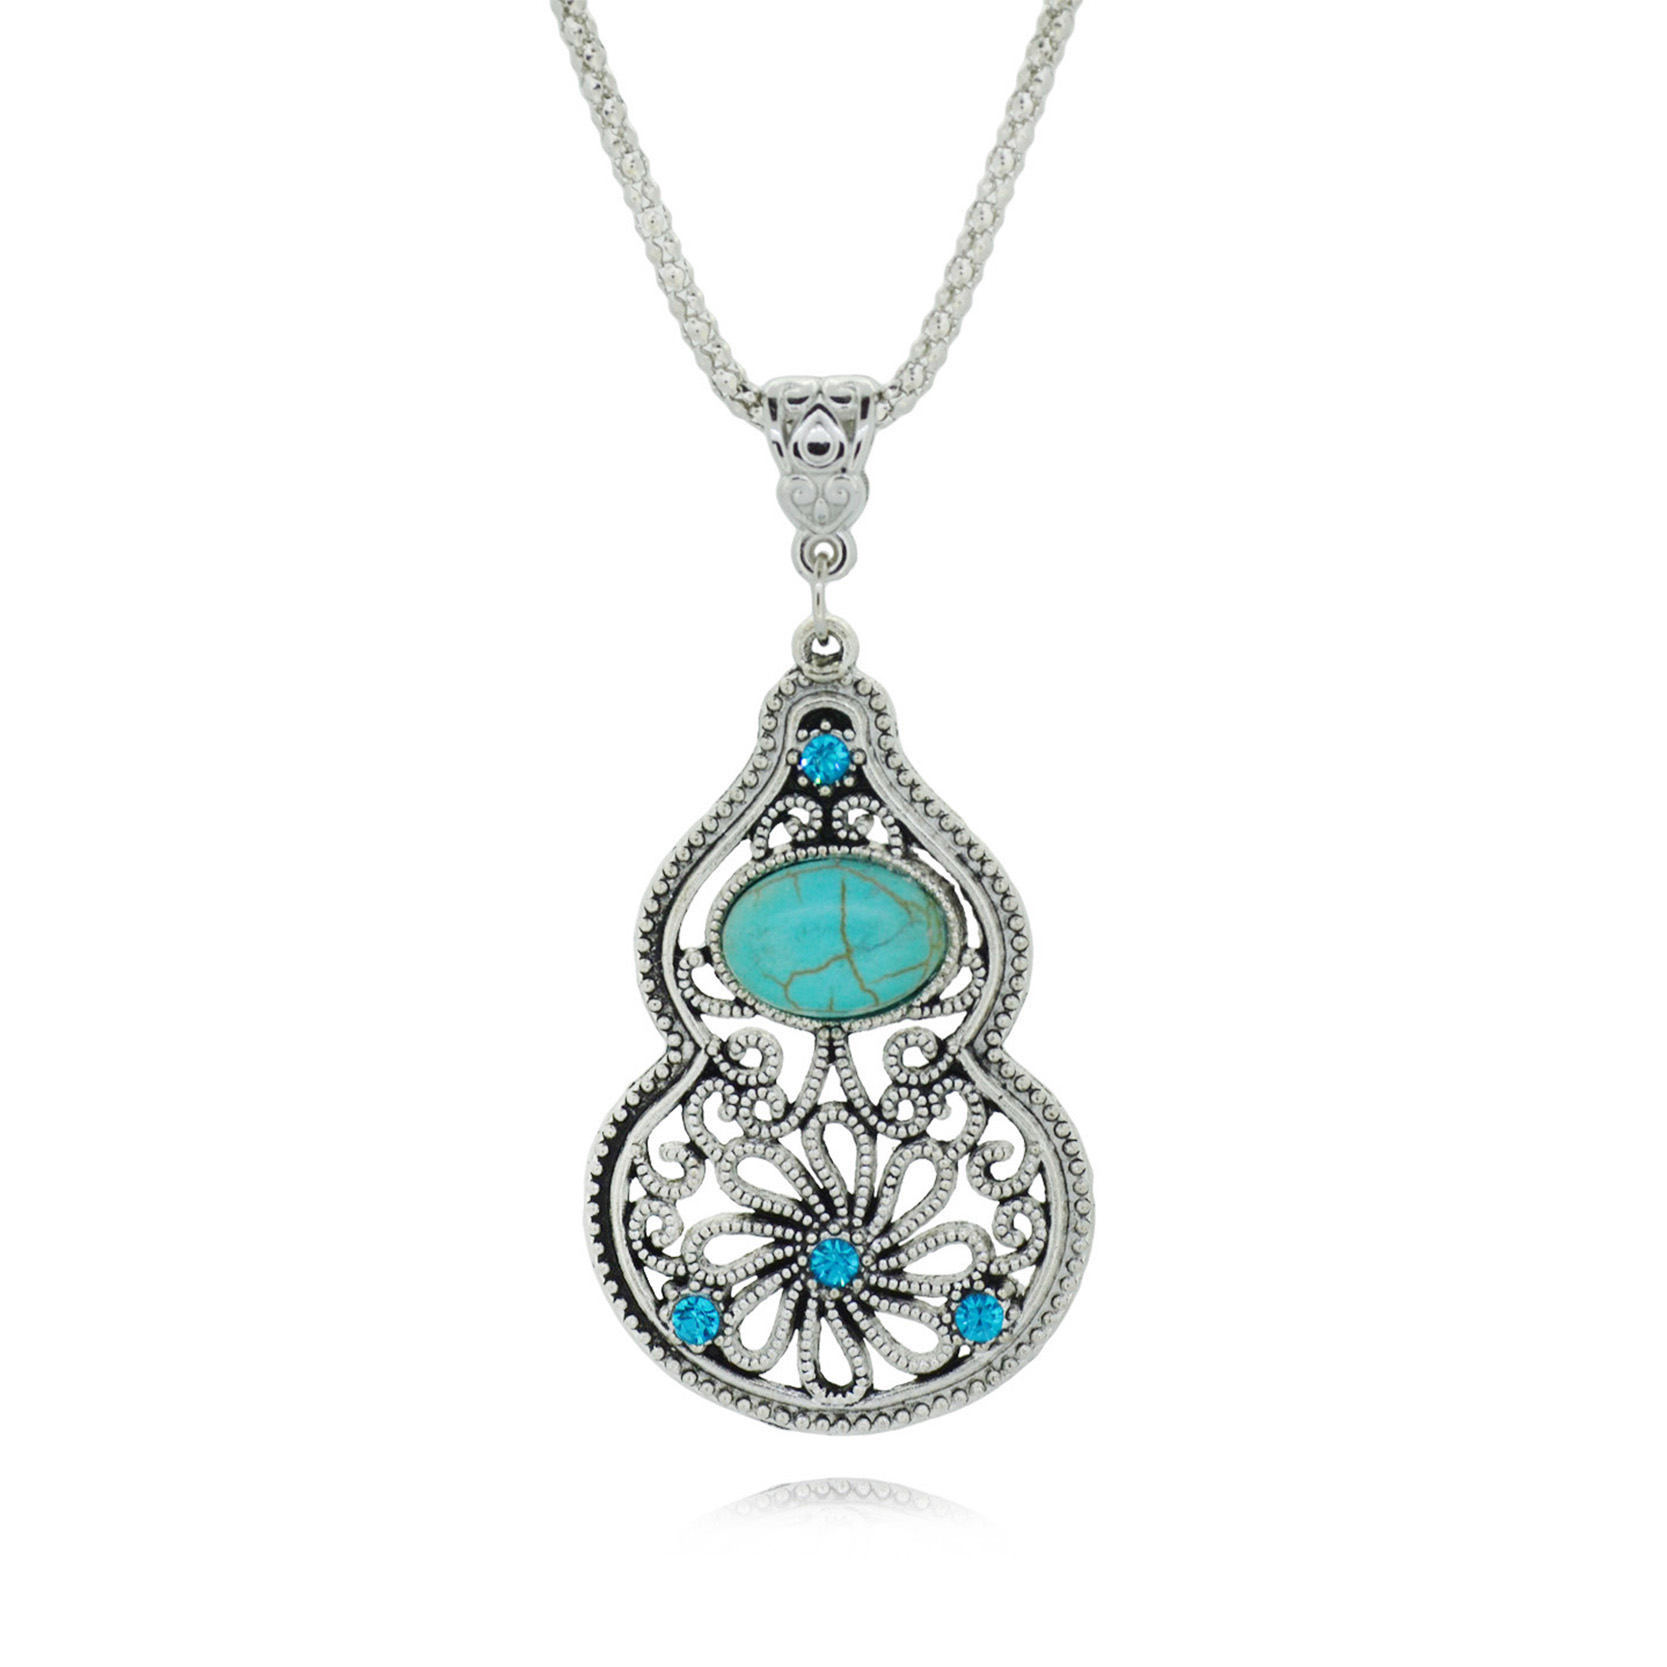 New 2014 High Quality Vintage Look Hollow Turquoise Necklaces Silver Calabash Necklaces Pendants Women Jewelry on